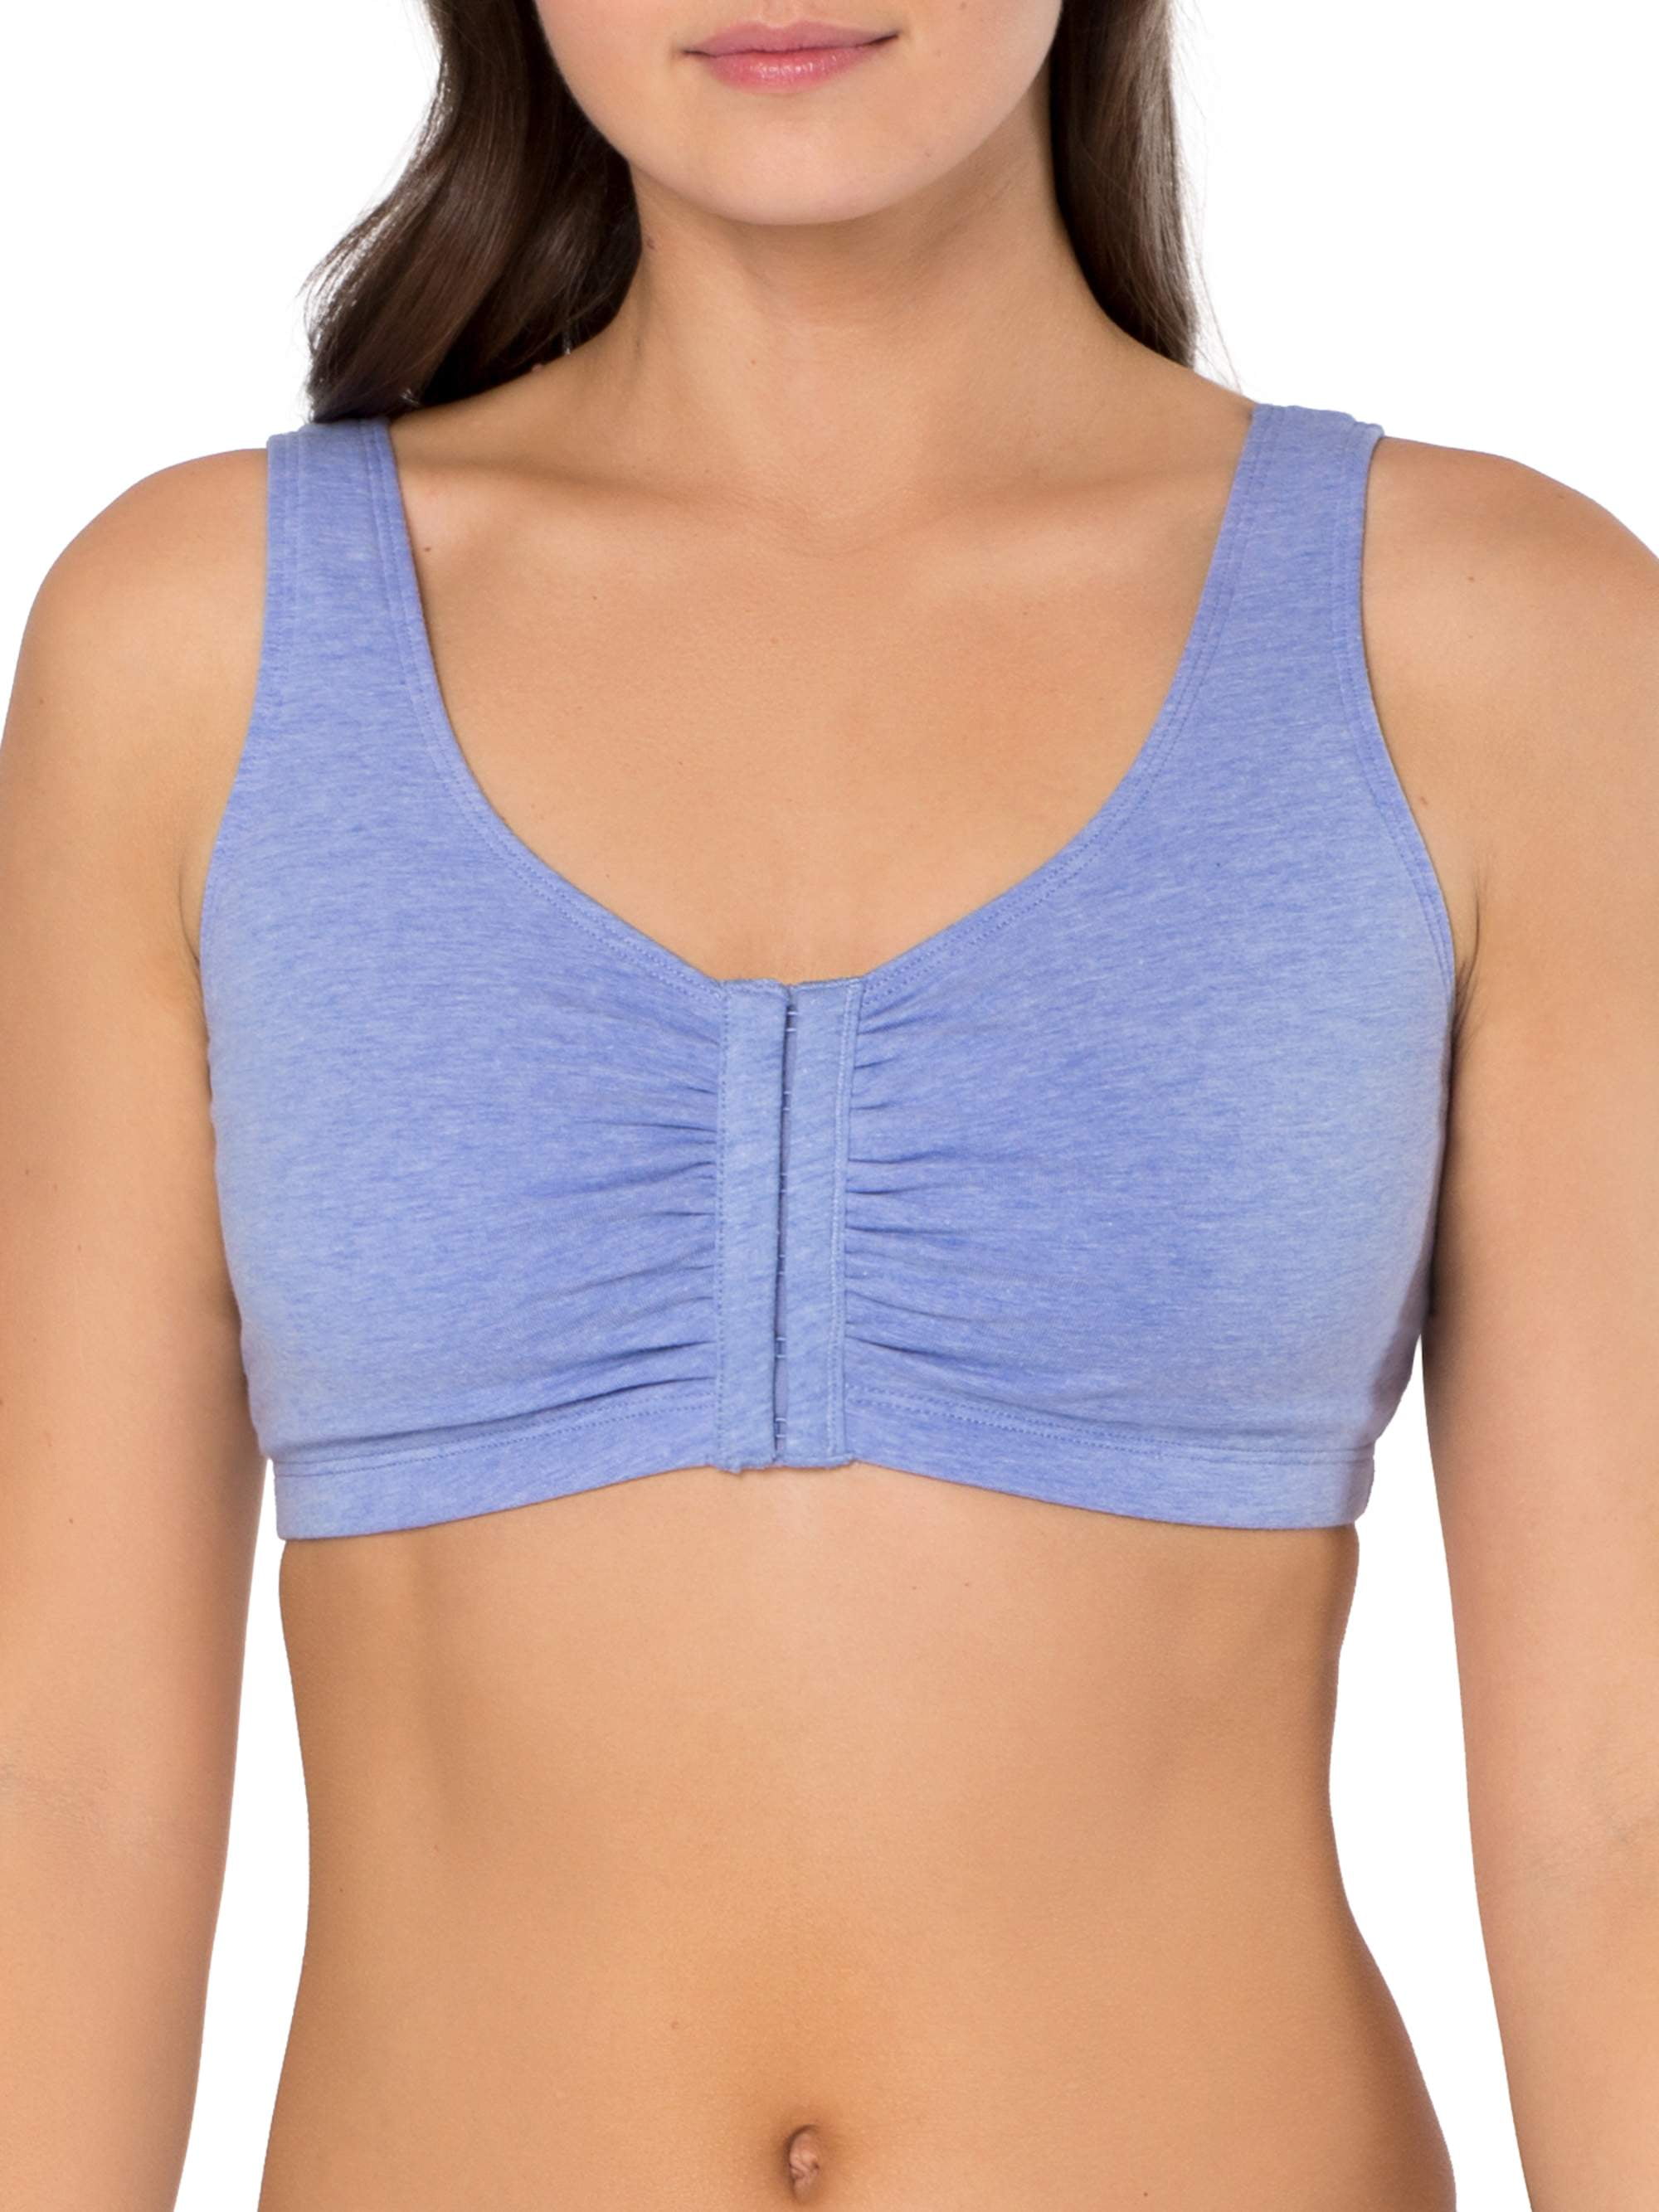 Fruit of the Loom Womens Front Closure Cotton Bra 3-Pack 